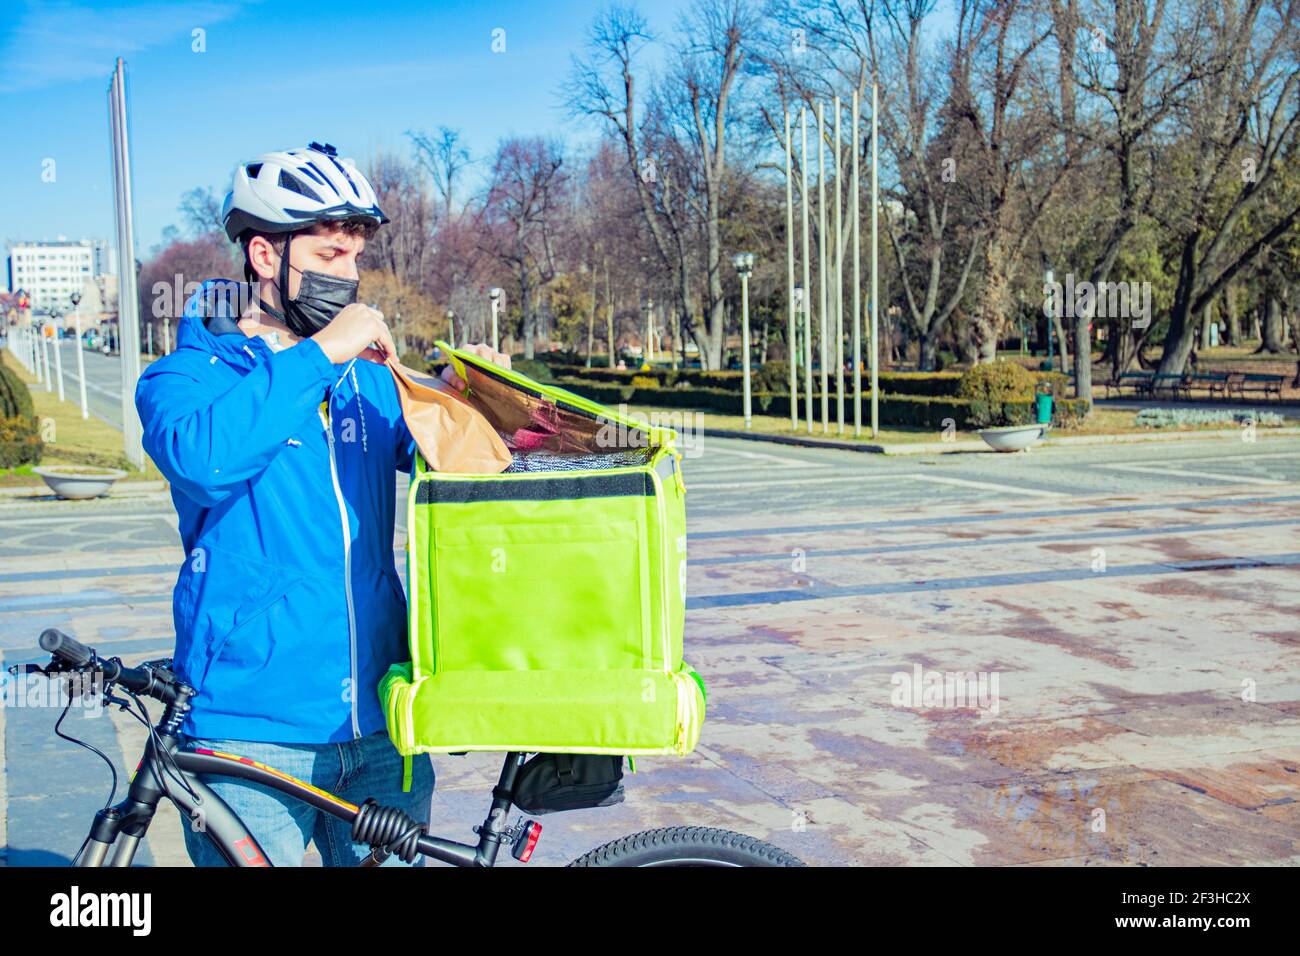 Delivery man riding bike wearing mask Stock Photo